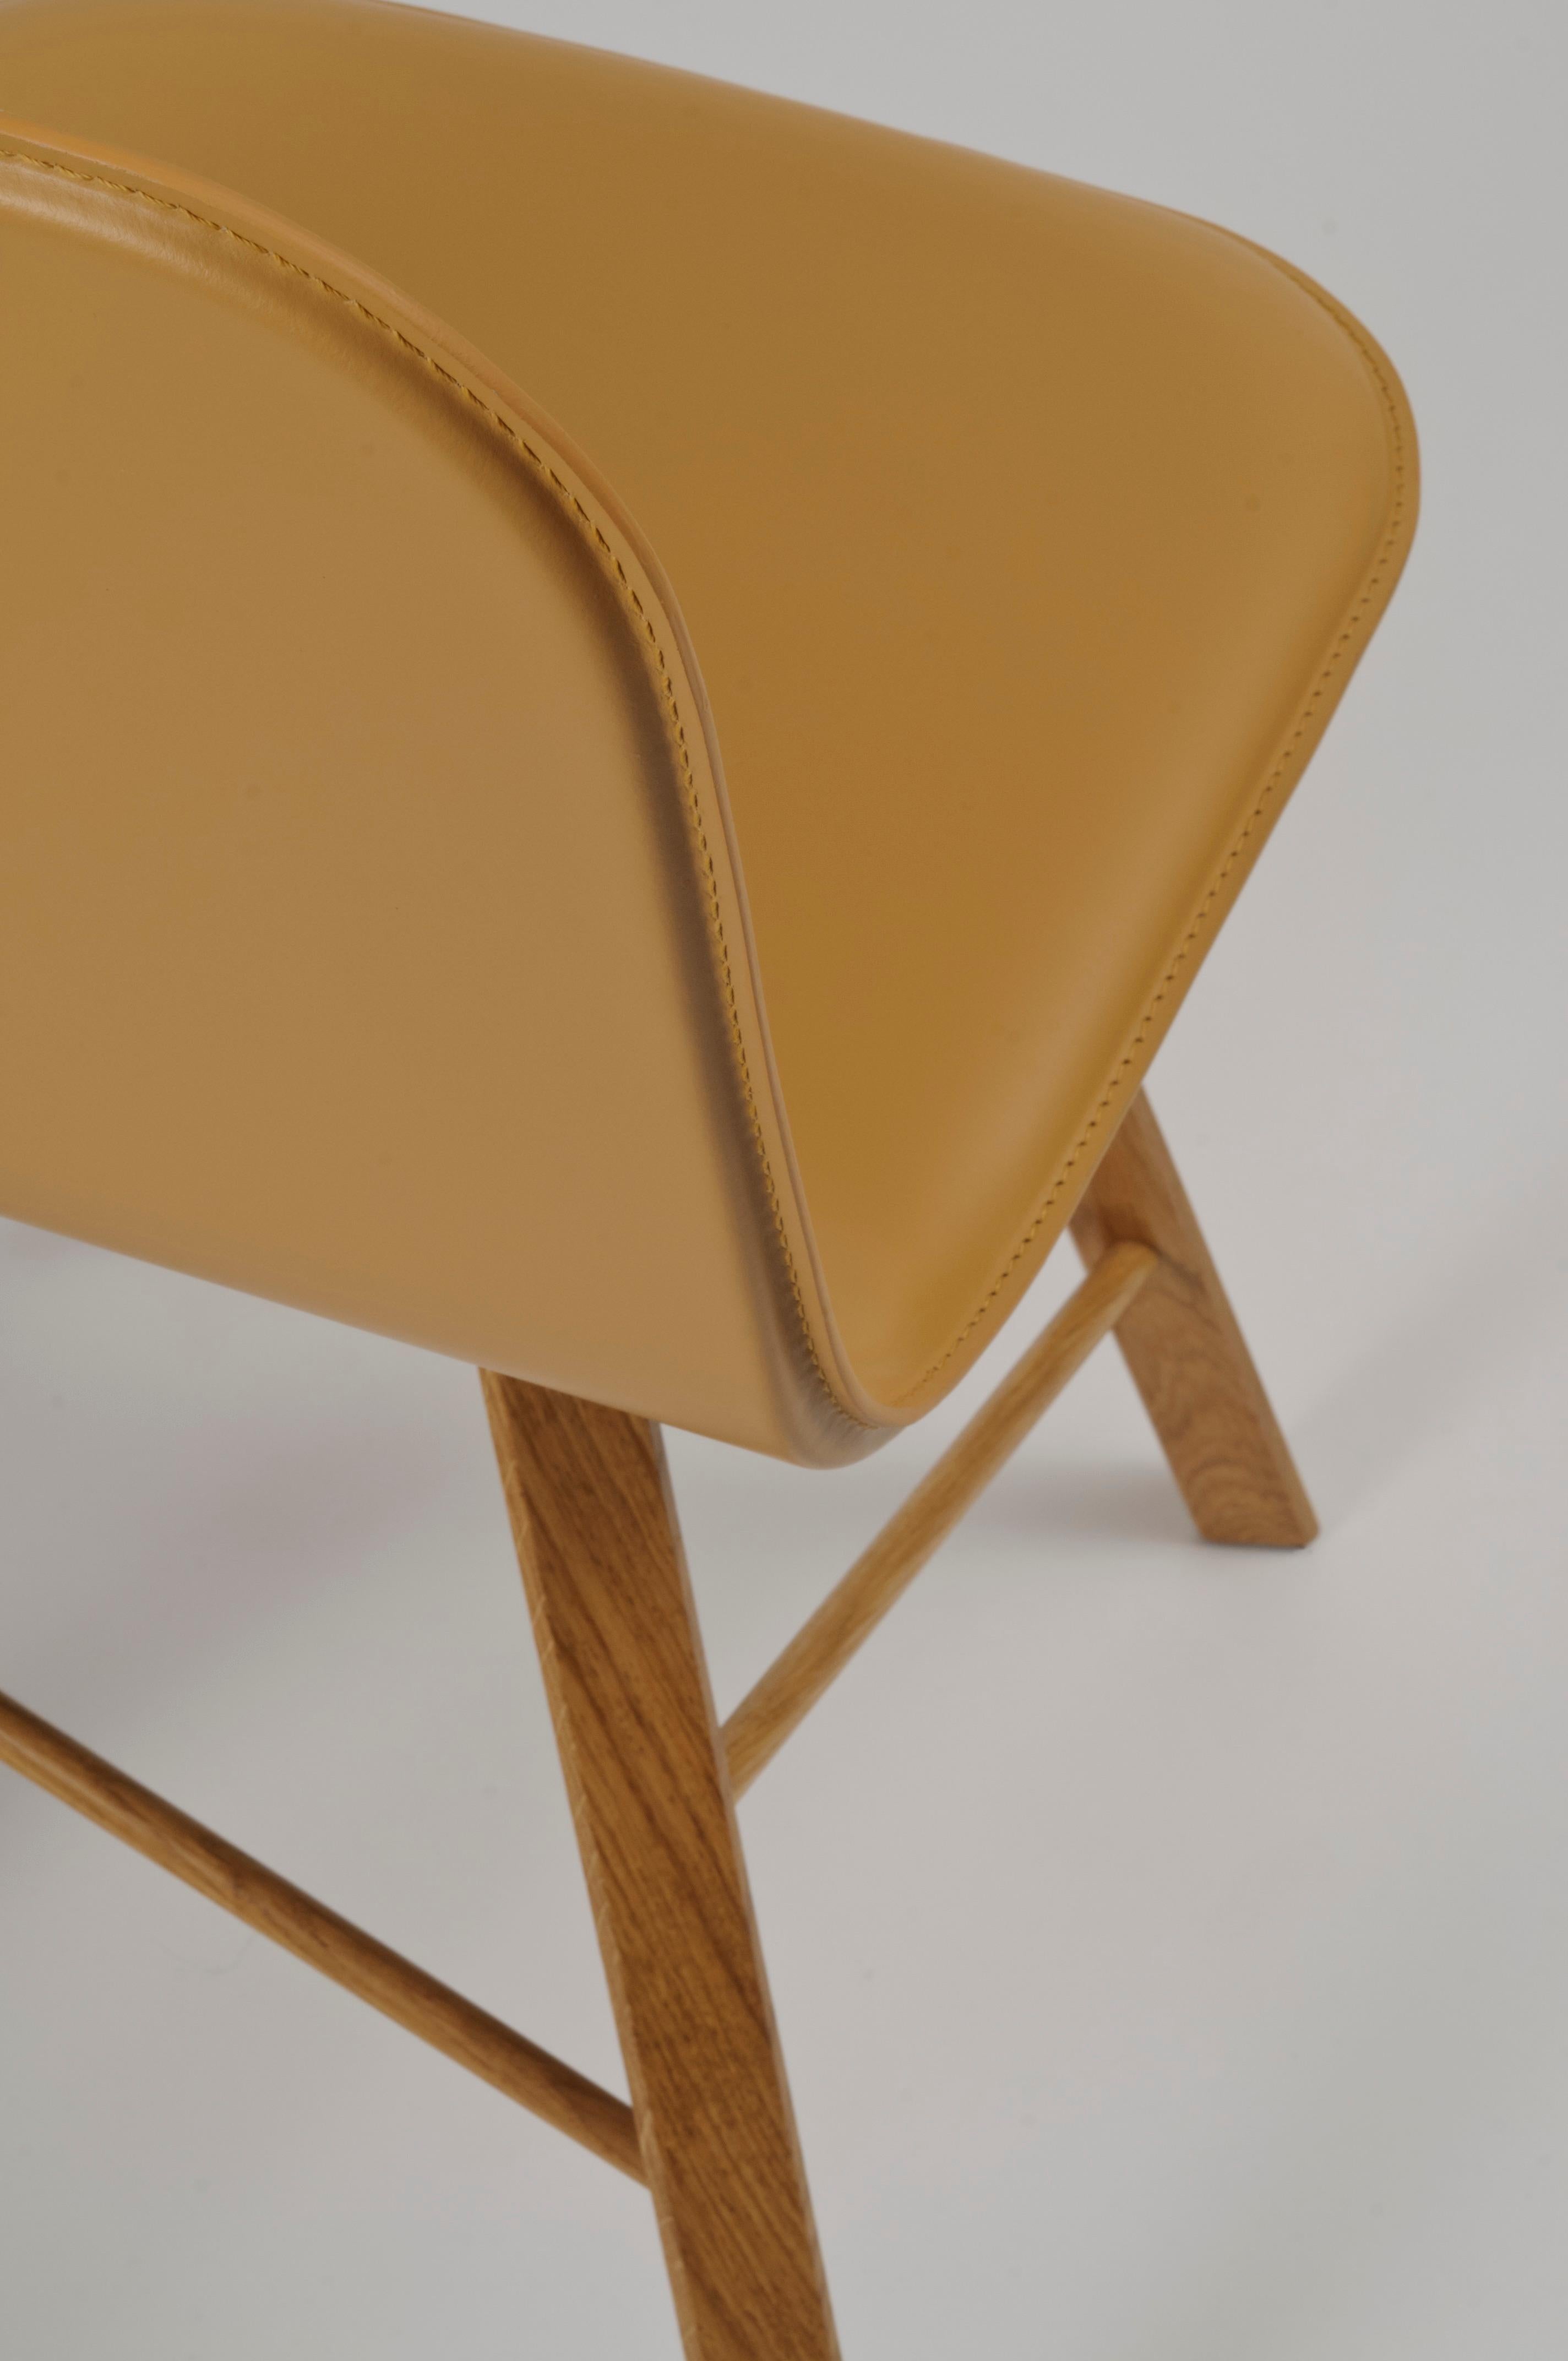 Essential and elegant chair with a bent plywood shell, and four iconic legs with triangular shape in solid oak, joined by transversal wooden bars.
The shel is upholstered in natural leather available also in black and other different colors. In